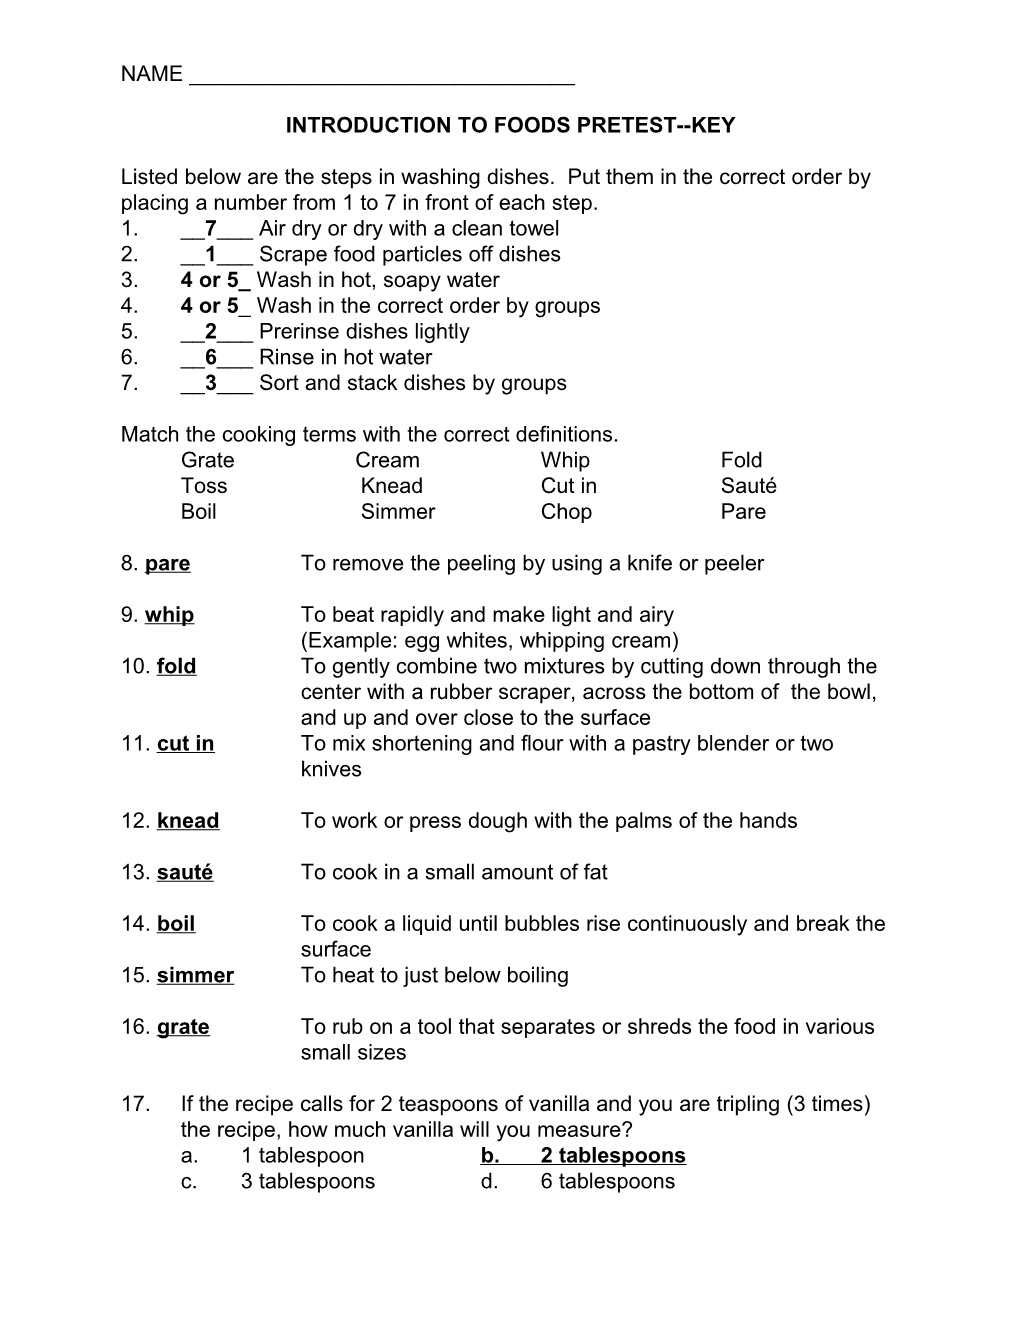 Introduction to Foods Pretest Key